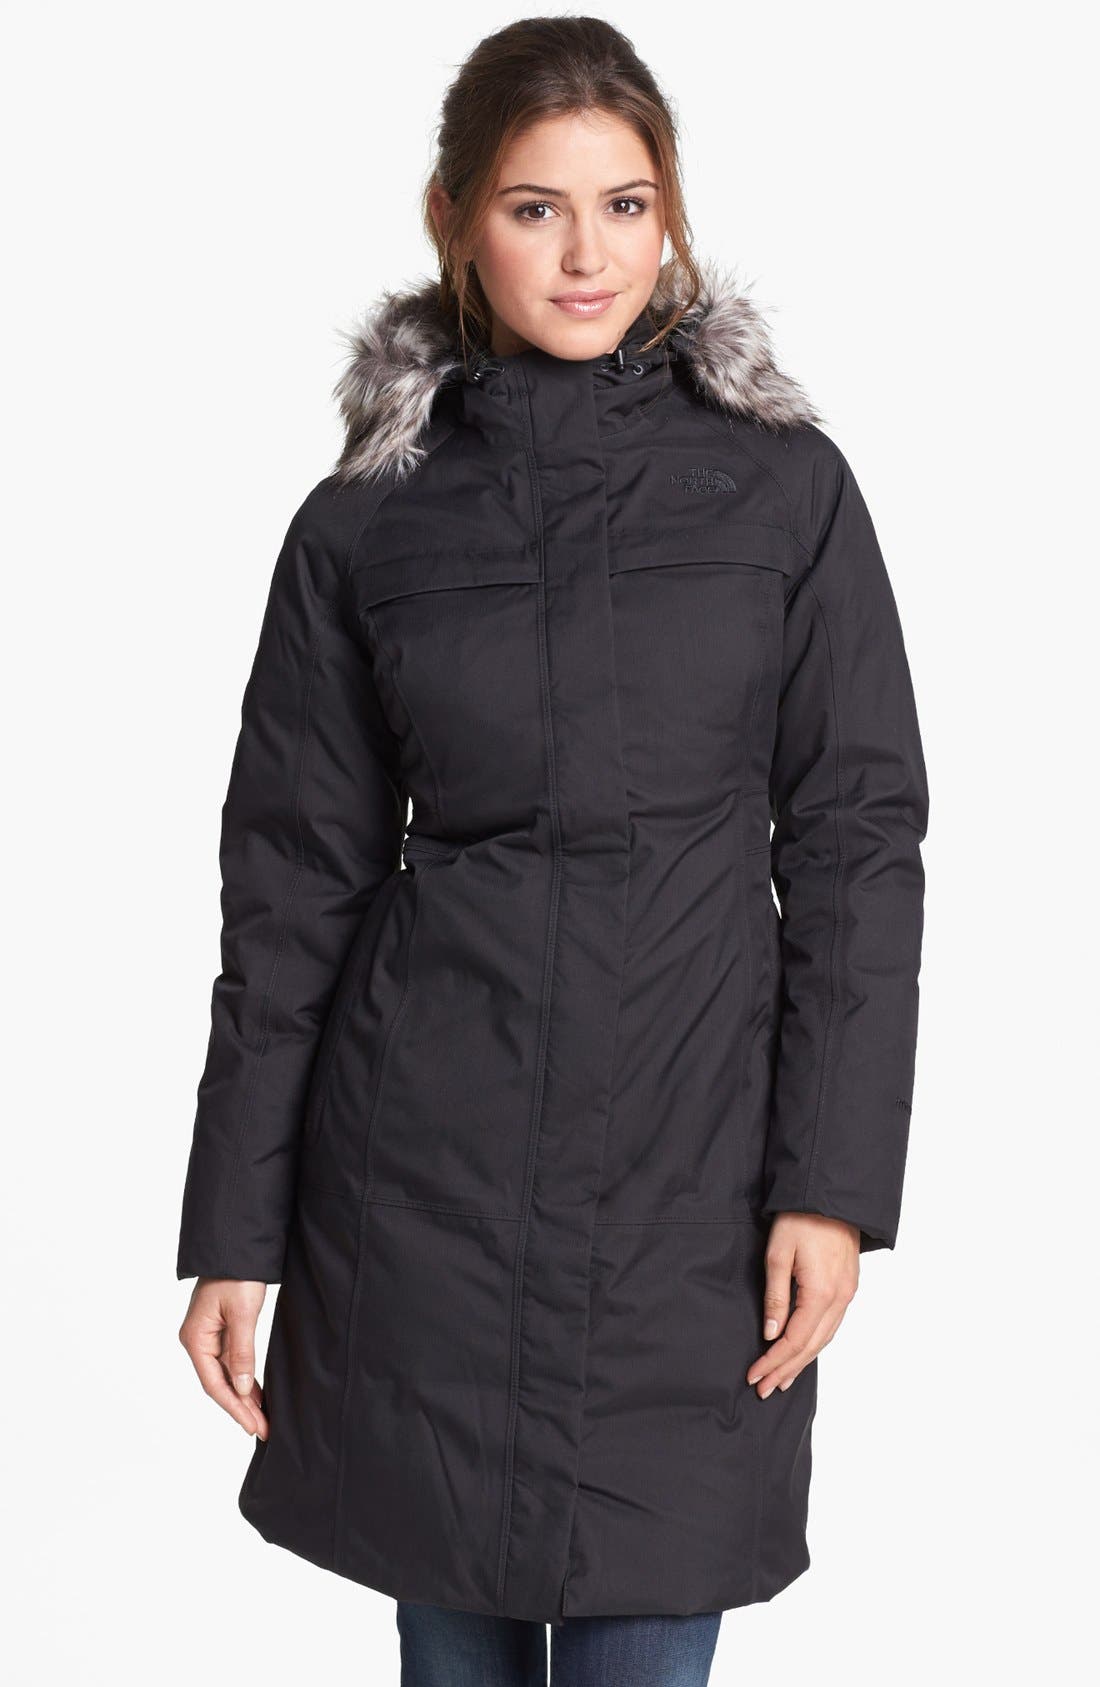 North Face 'Arctic' Down Parka | Nordstrom